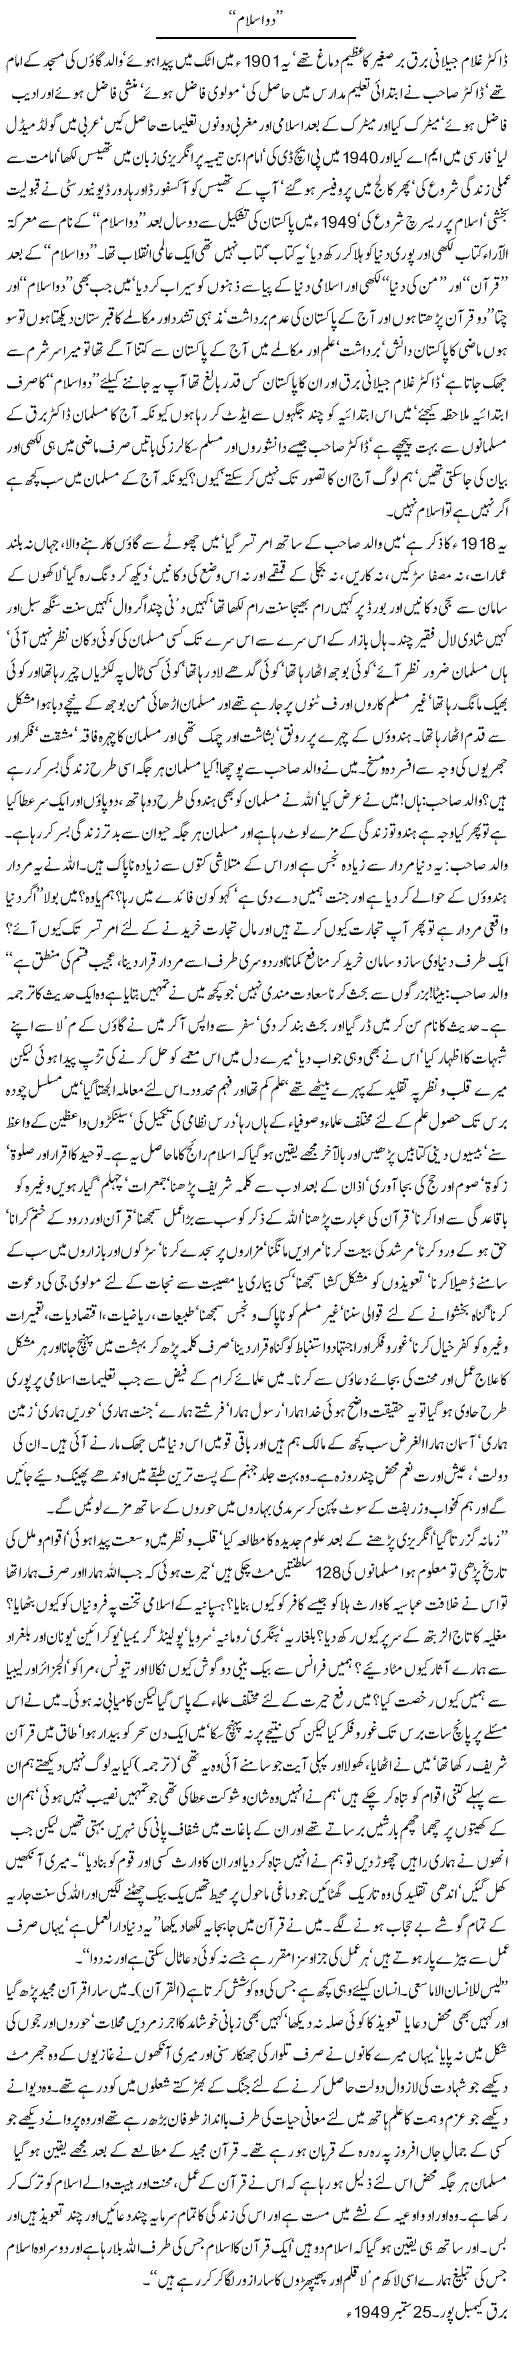 Do Islam by Javed Chaudhry